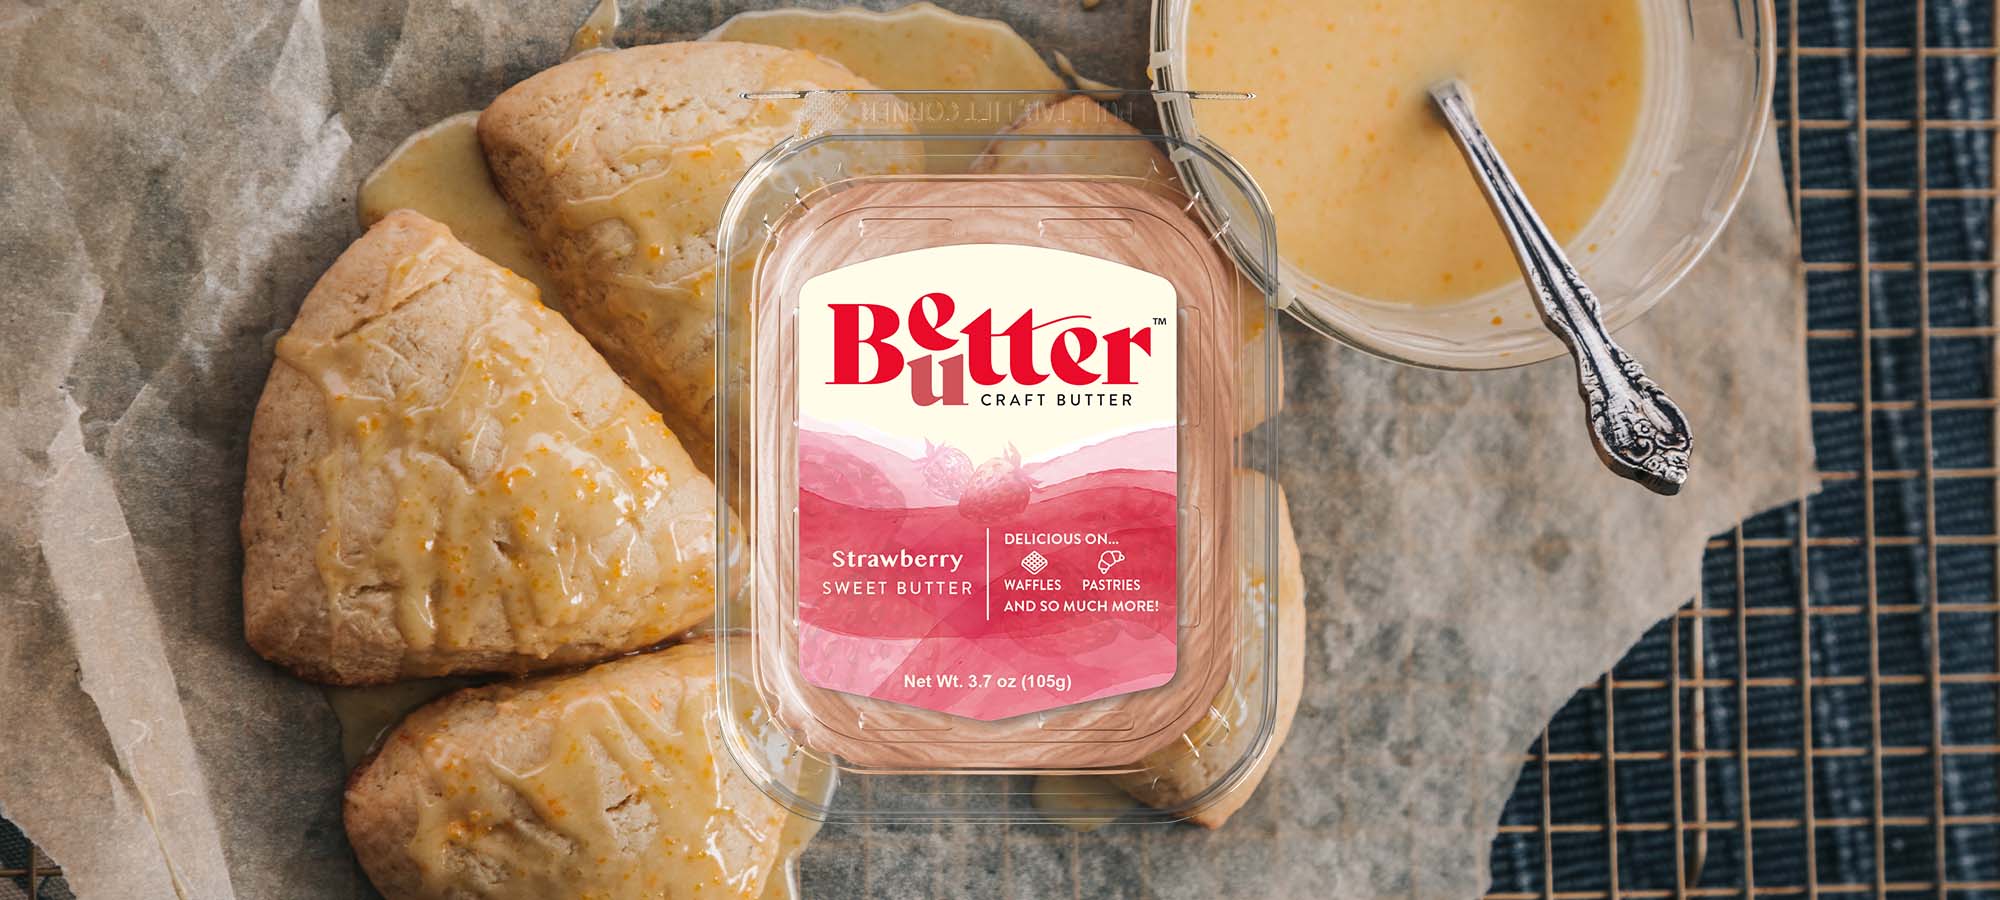 Our Strawberry Craft Butter